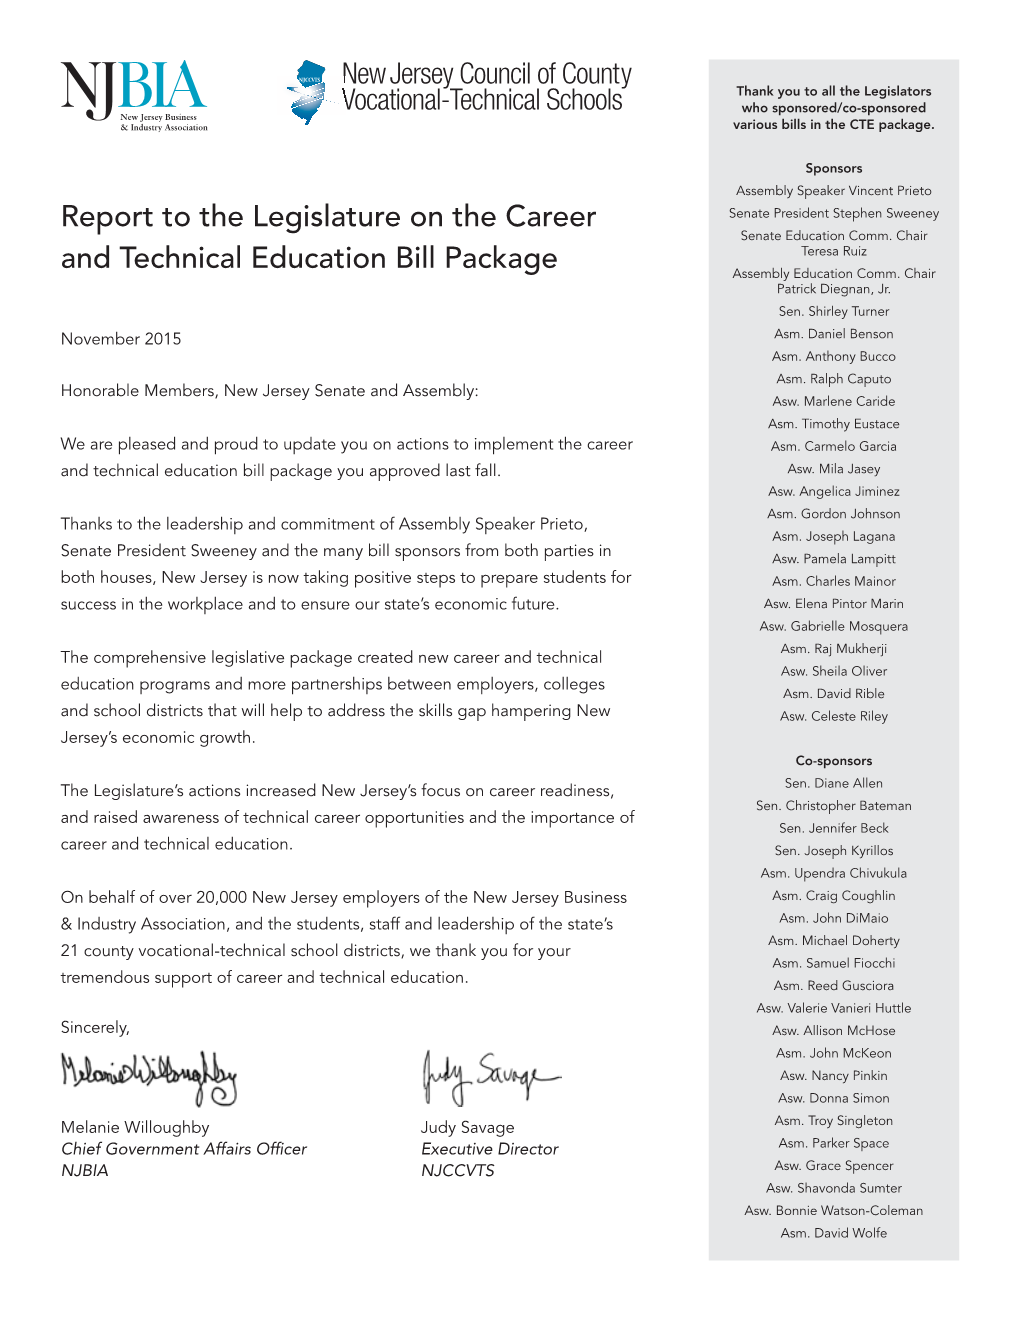 Report to the Legislature on the Career and Technical Education